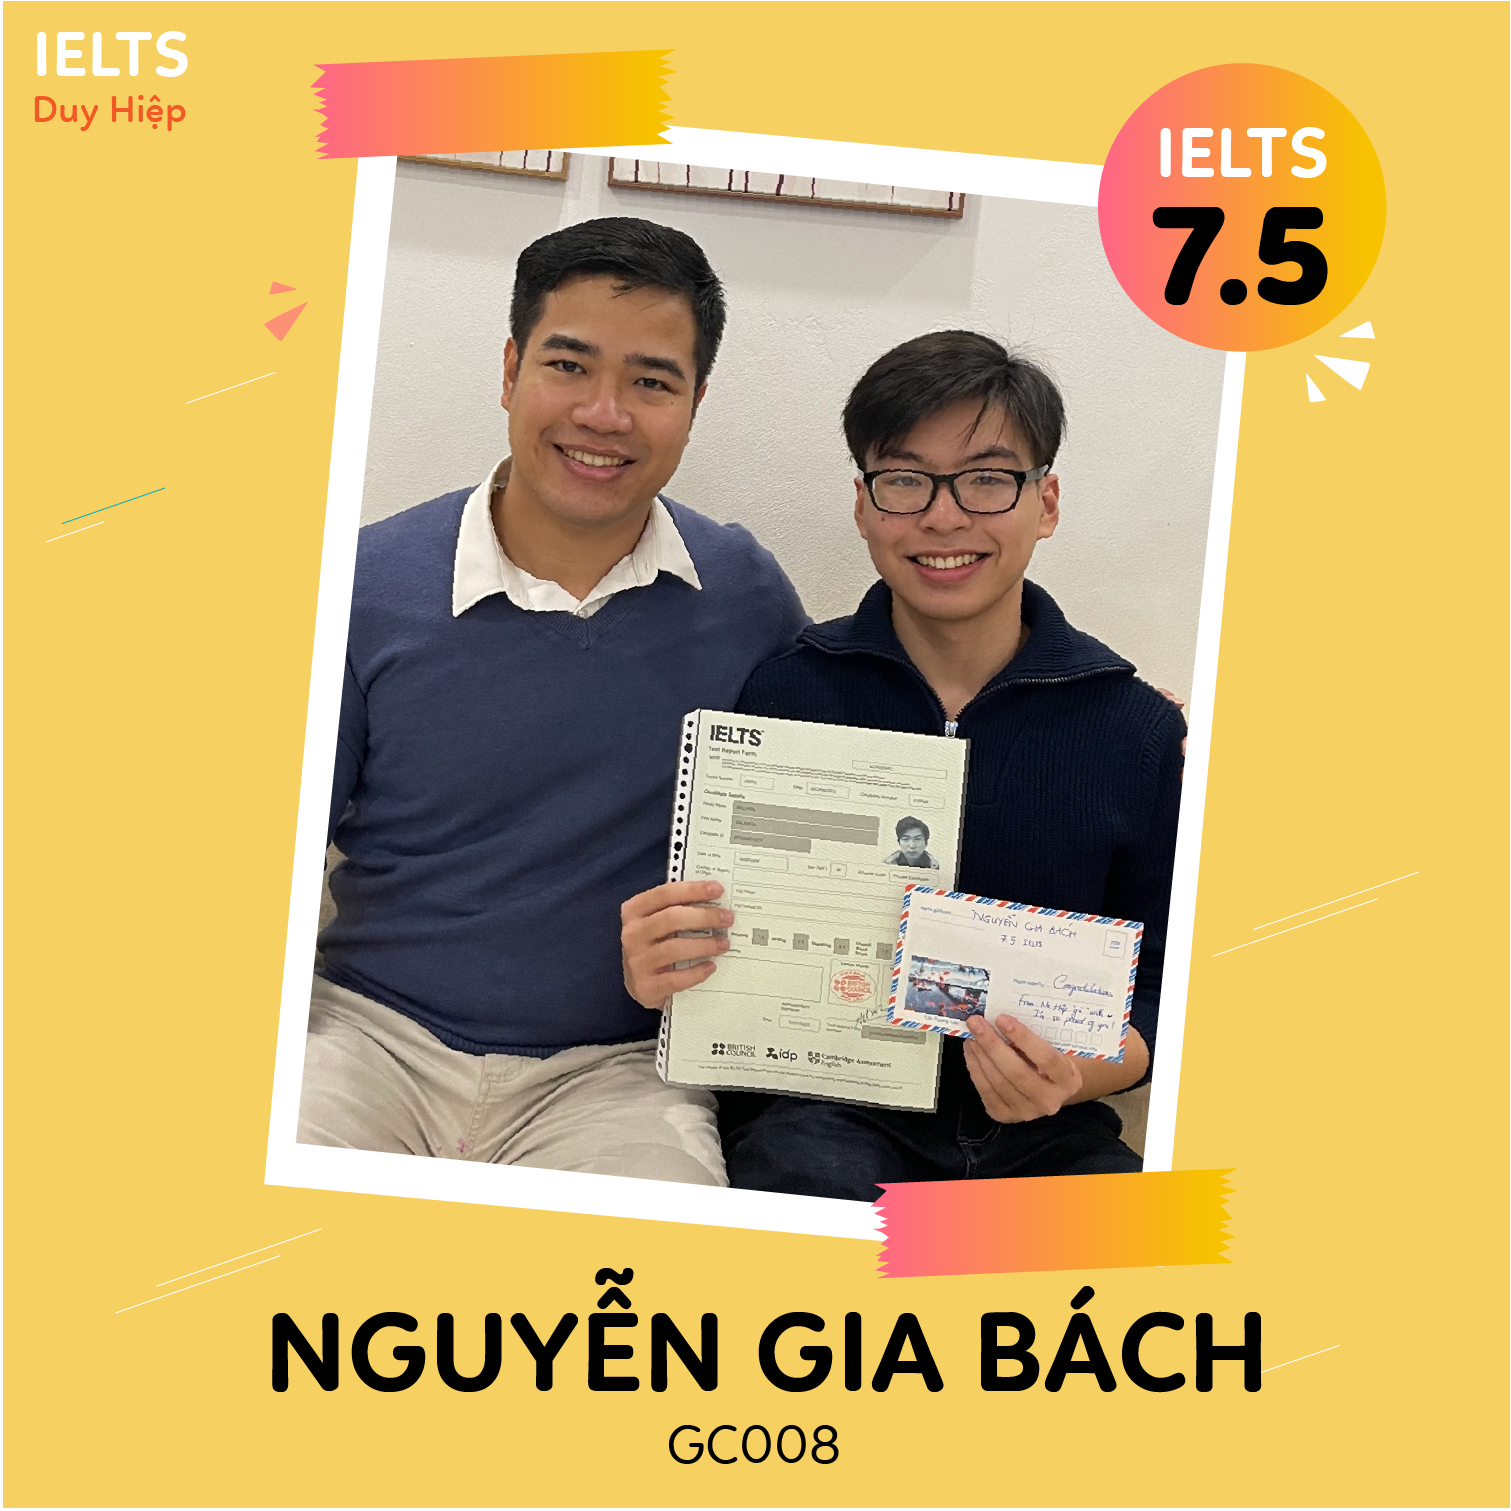 WALL OF FAME - Nguyễn Gia Bách - 7.5 IELTS